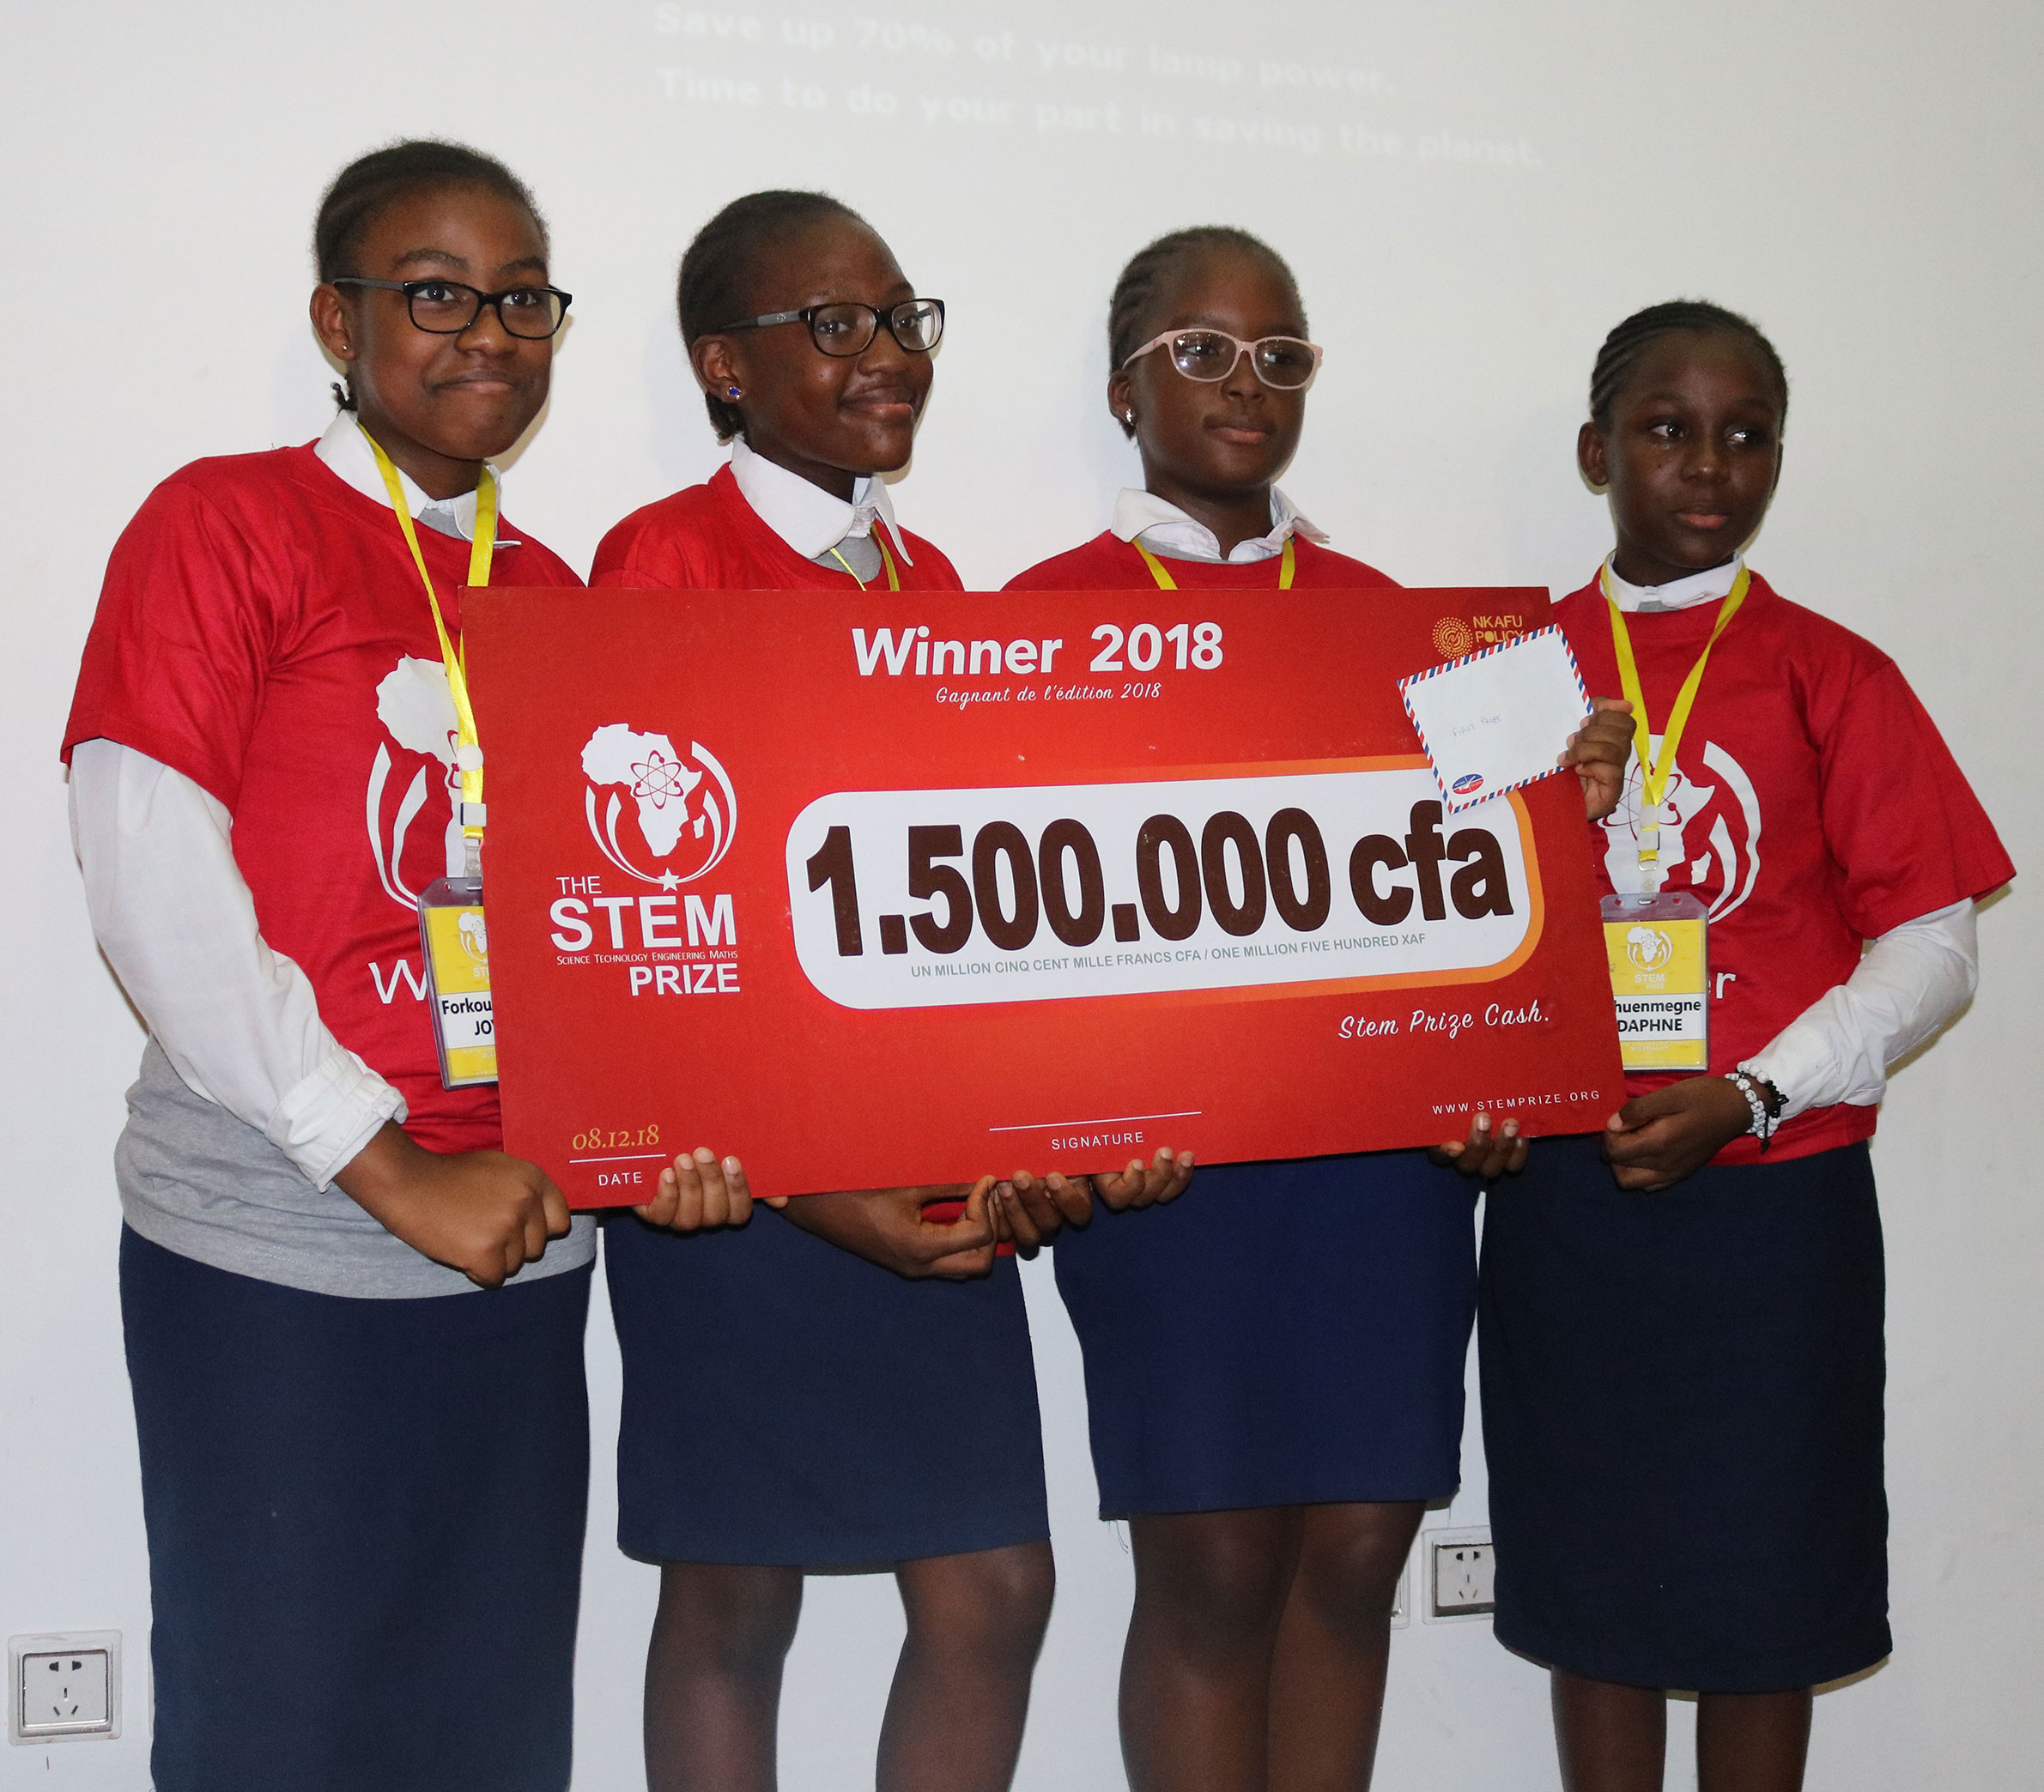 stemprize-winner-2018-edition-foretiafoundation